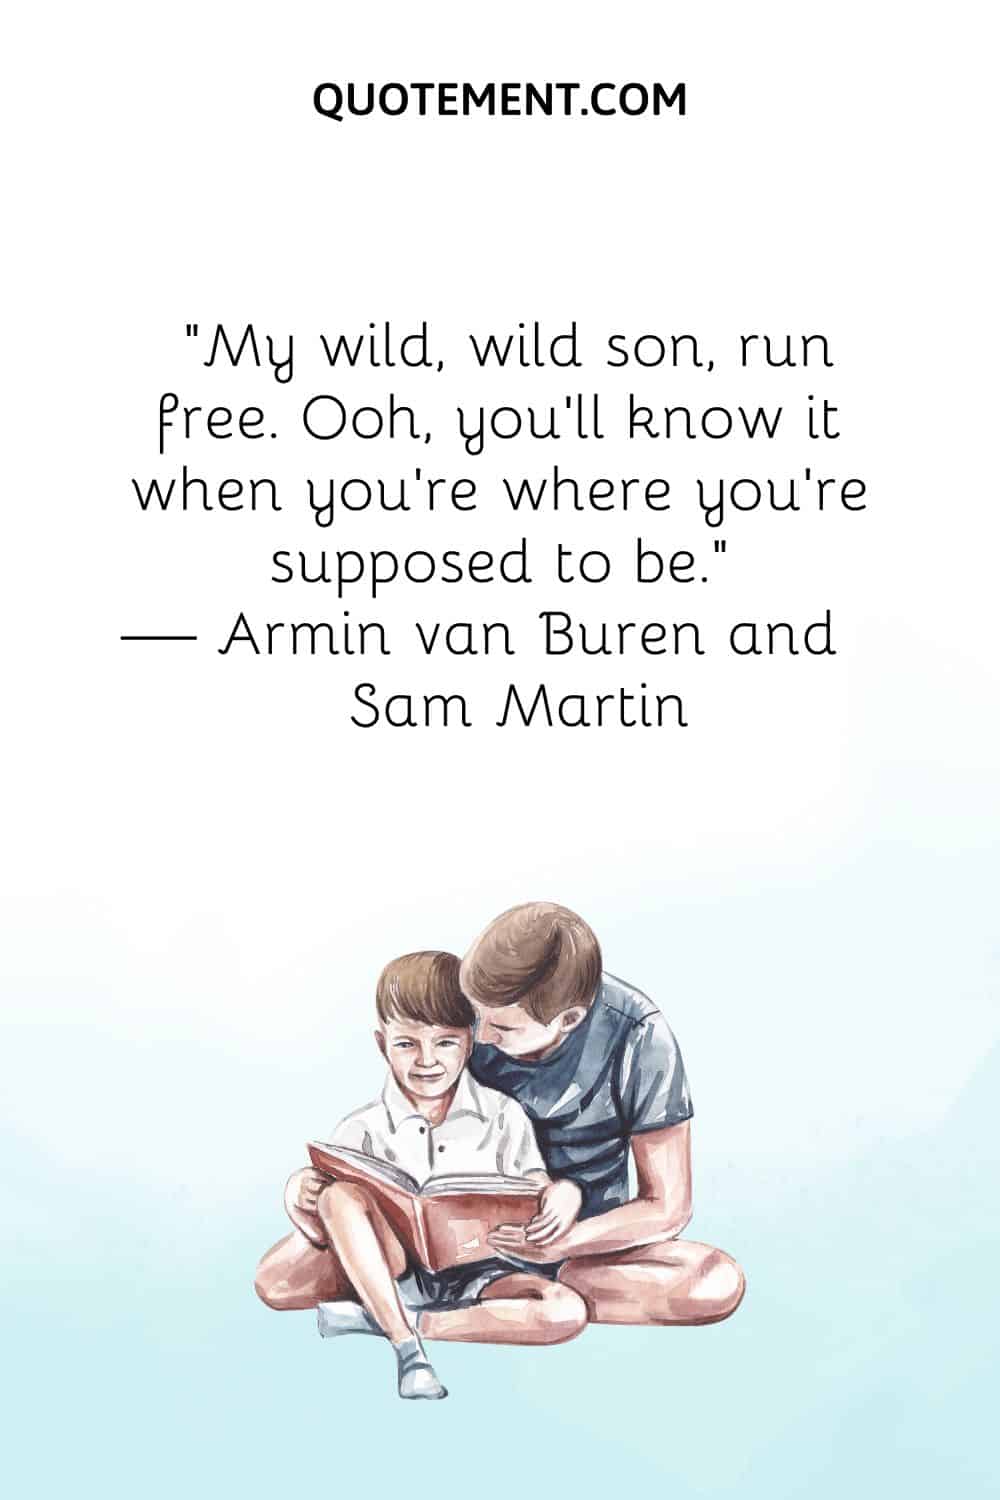 dad and son reading image representing beautiful quote for my loving son